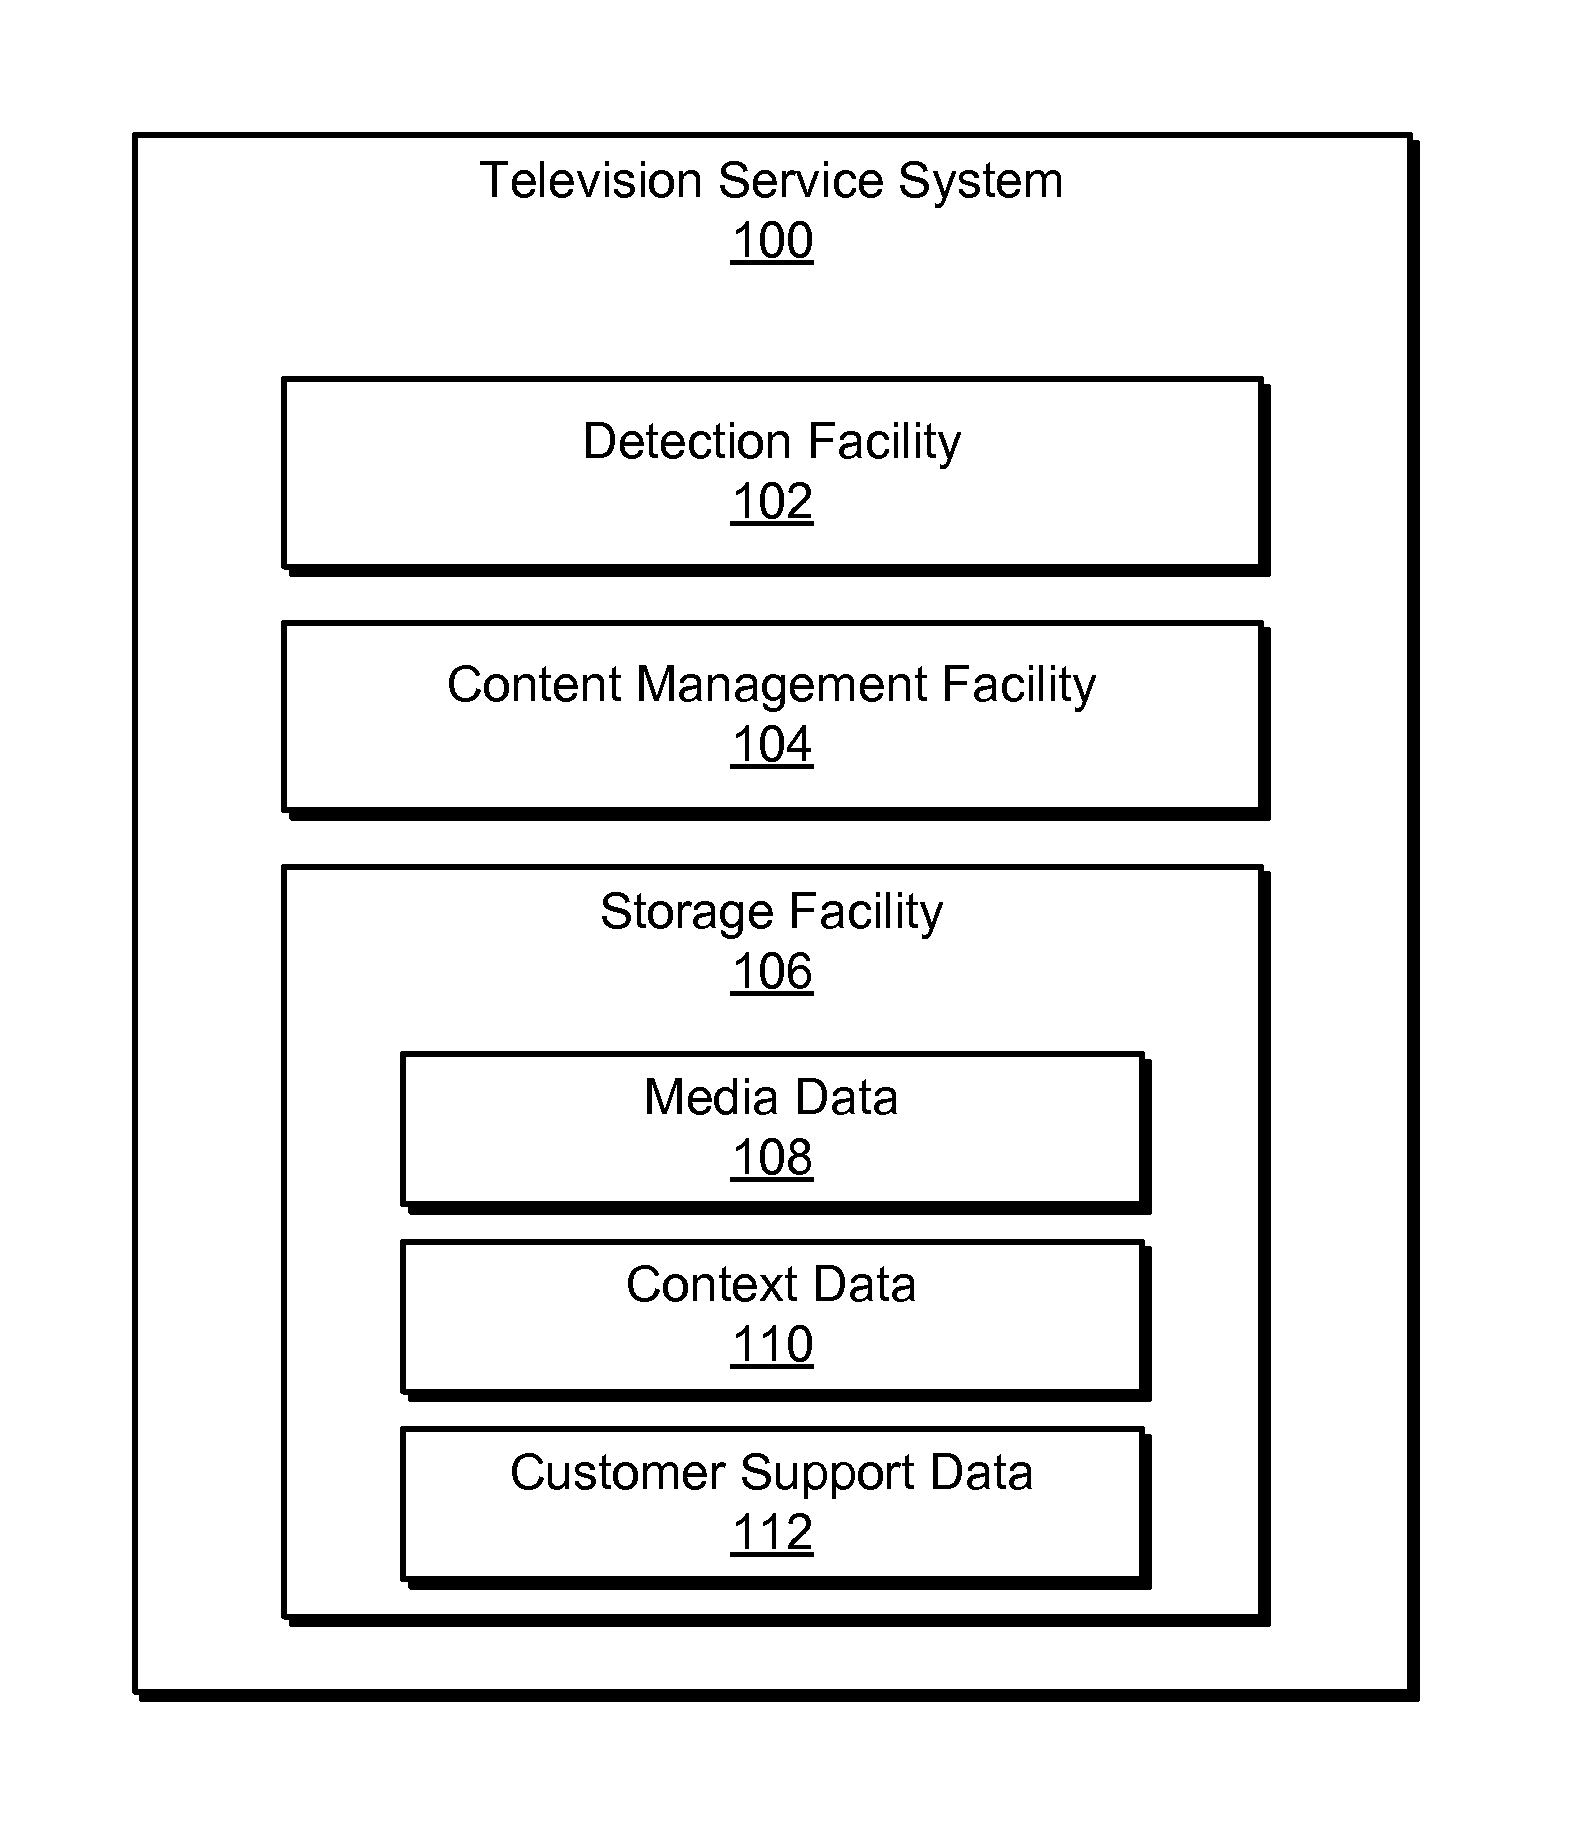 Methods and Systems for Providing Context-Based Customer Support for a User Interface View Associated with a Television Service